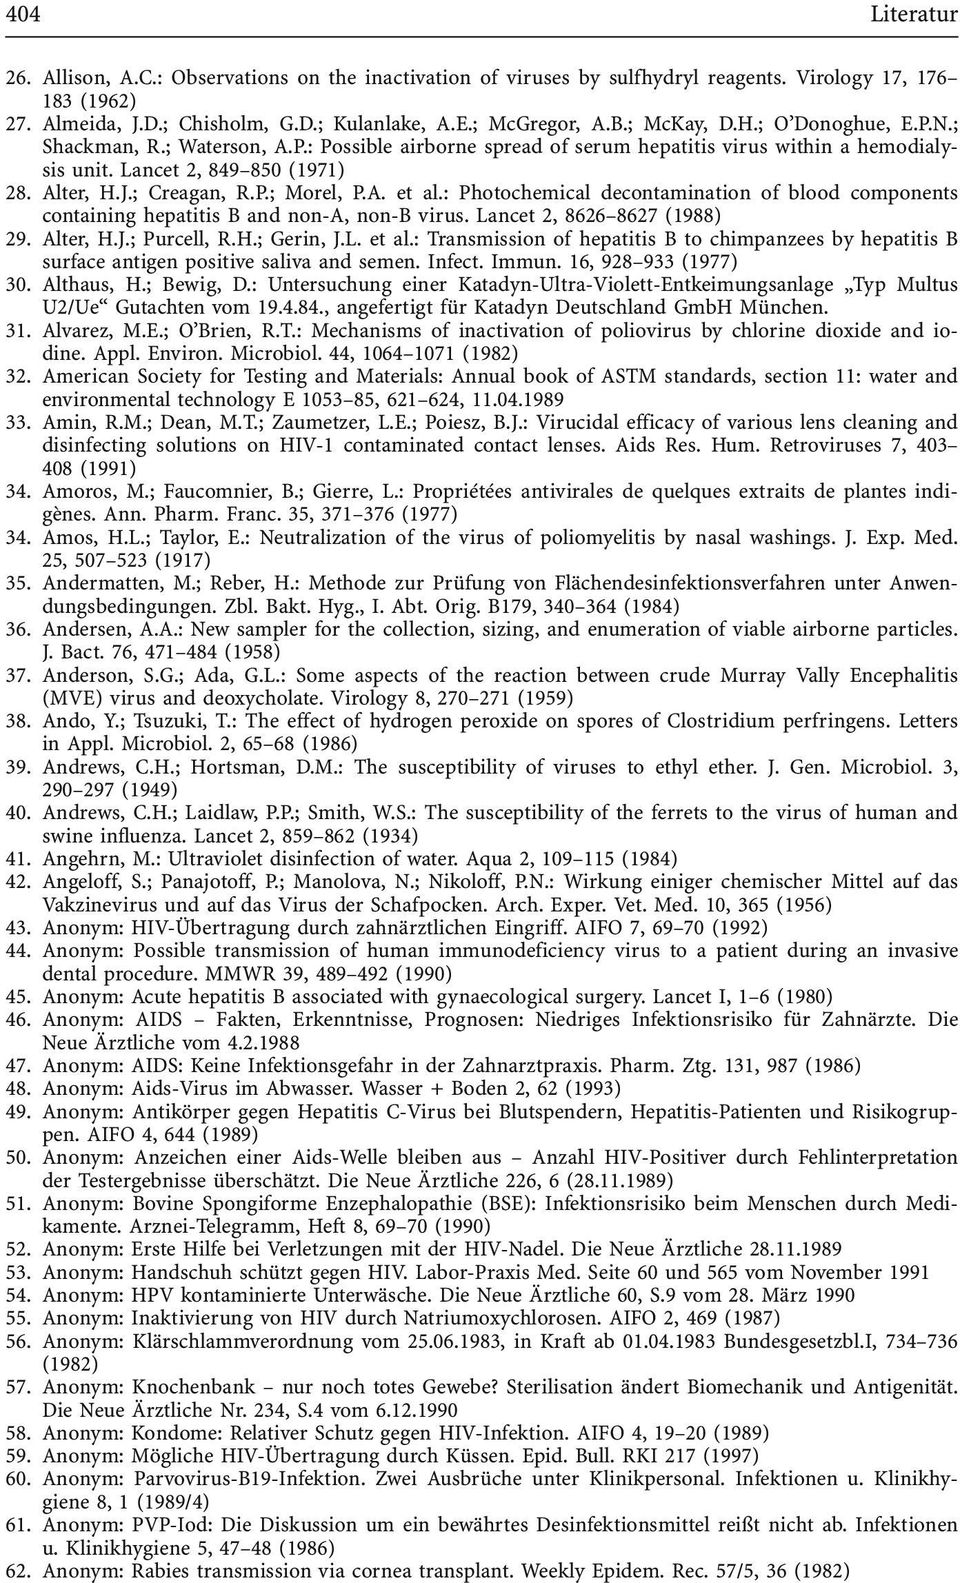 A. et al.: Photochemical decontamination of blood components containing hepatitis B and non-a, non-b virus. Lancet 2, 8626±8627 (1988) 29. Alter, H.J.; Purcell, R.H.; Gerin, J.L. et al.: Transmission of hepatitis B to chimpanzees by hepatitis B surface antigen positive saliva and semen.